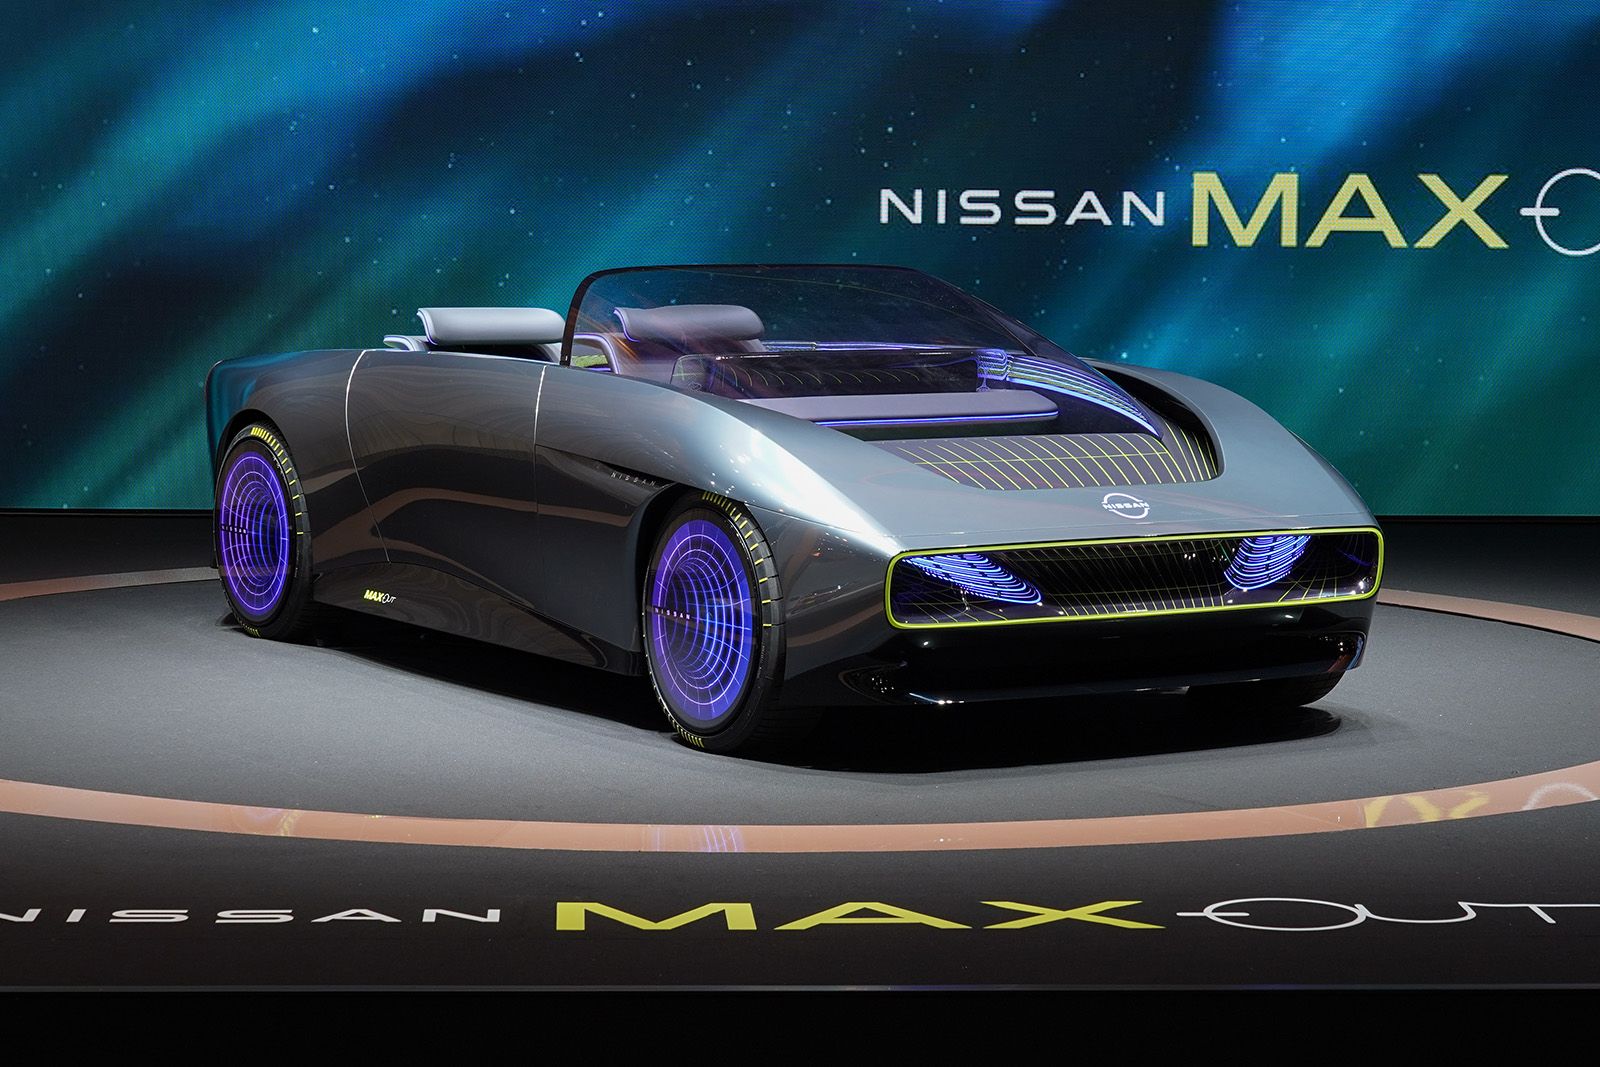 Nissan Max-Out convertible EV concept looks like it's straight out of Tron